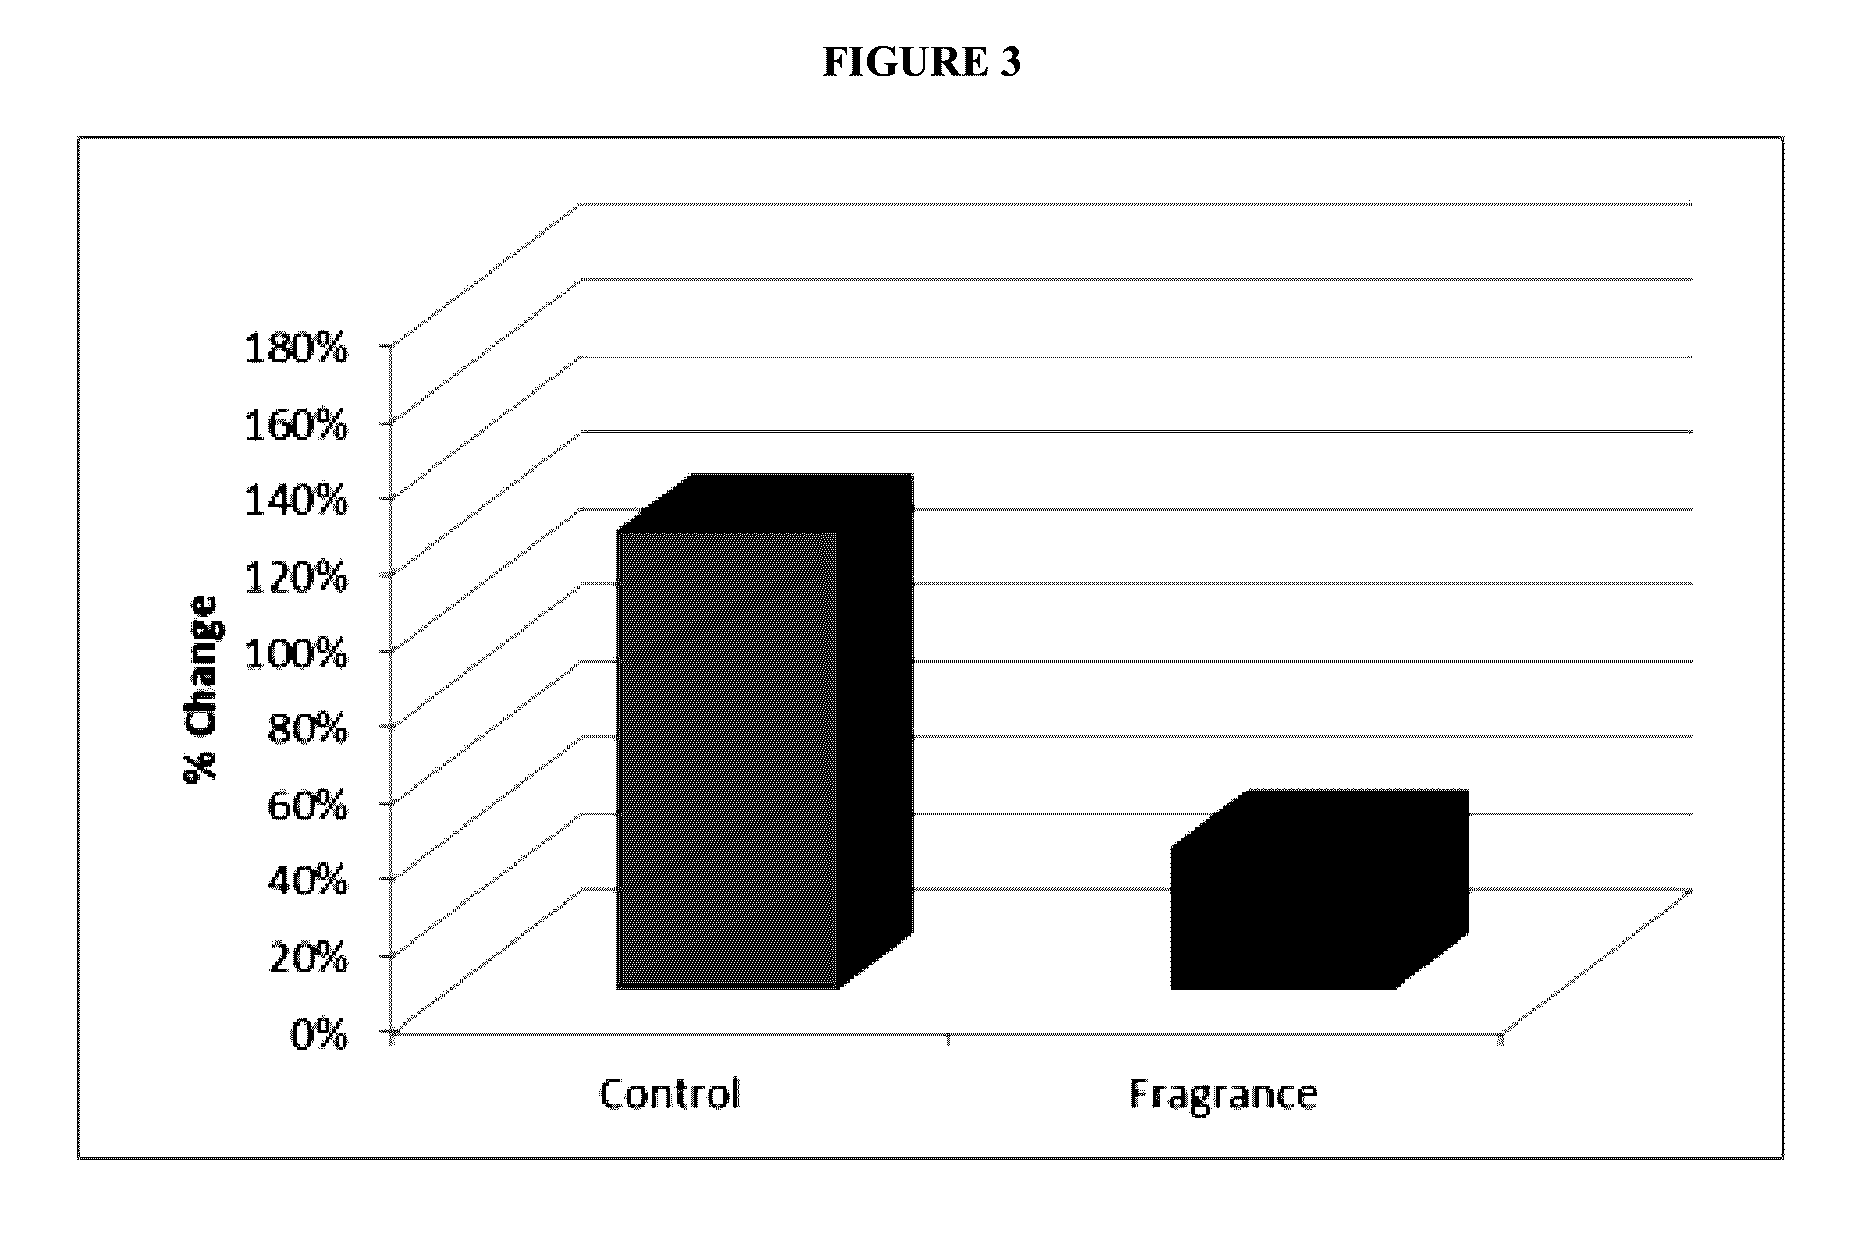 Musk compositions and methods of use thereof